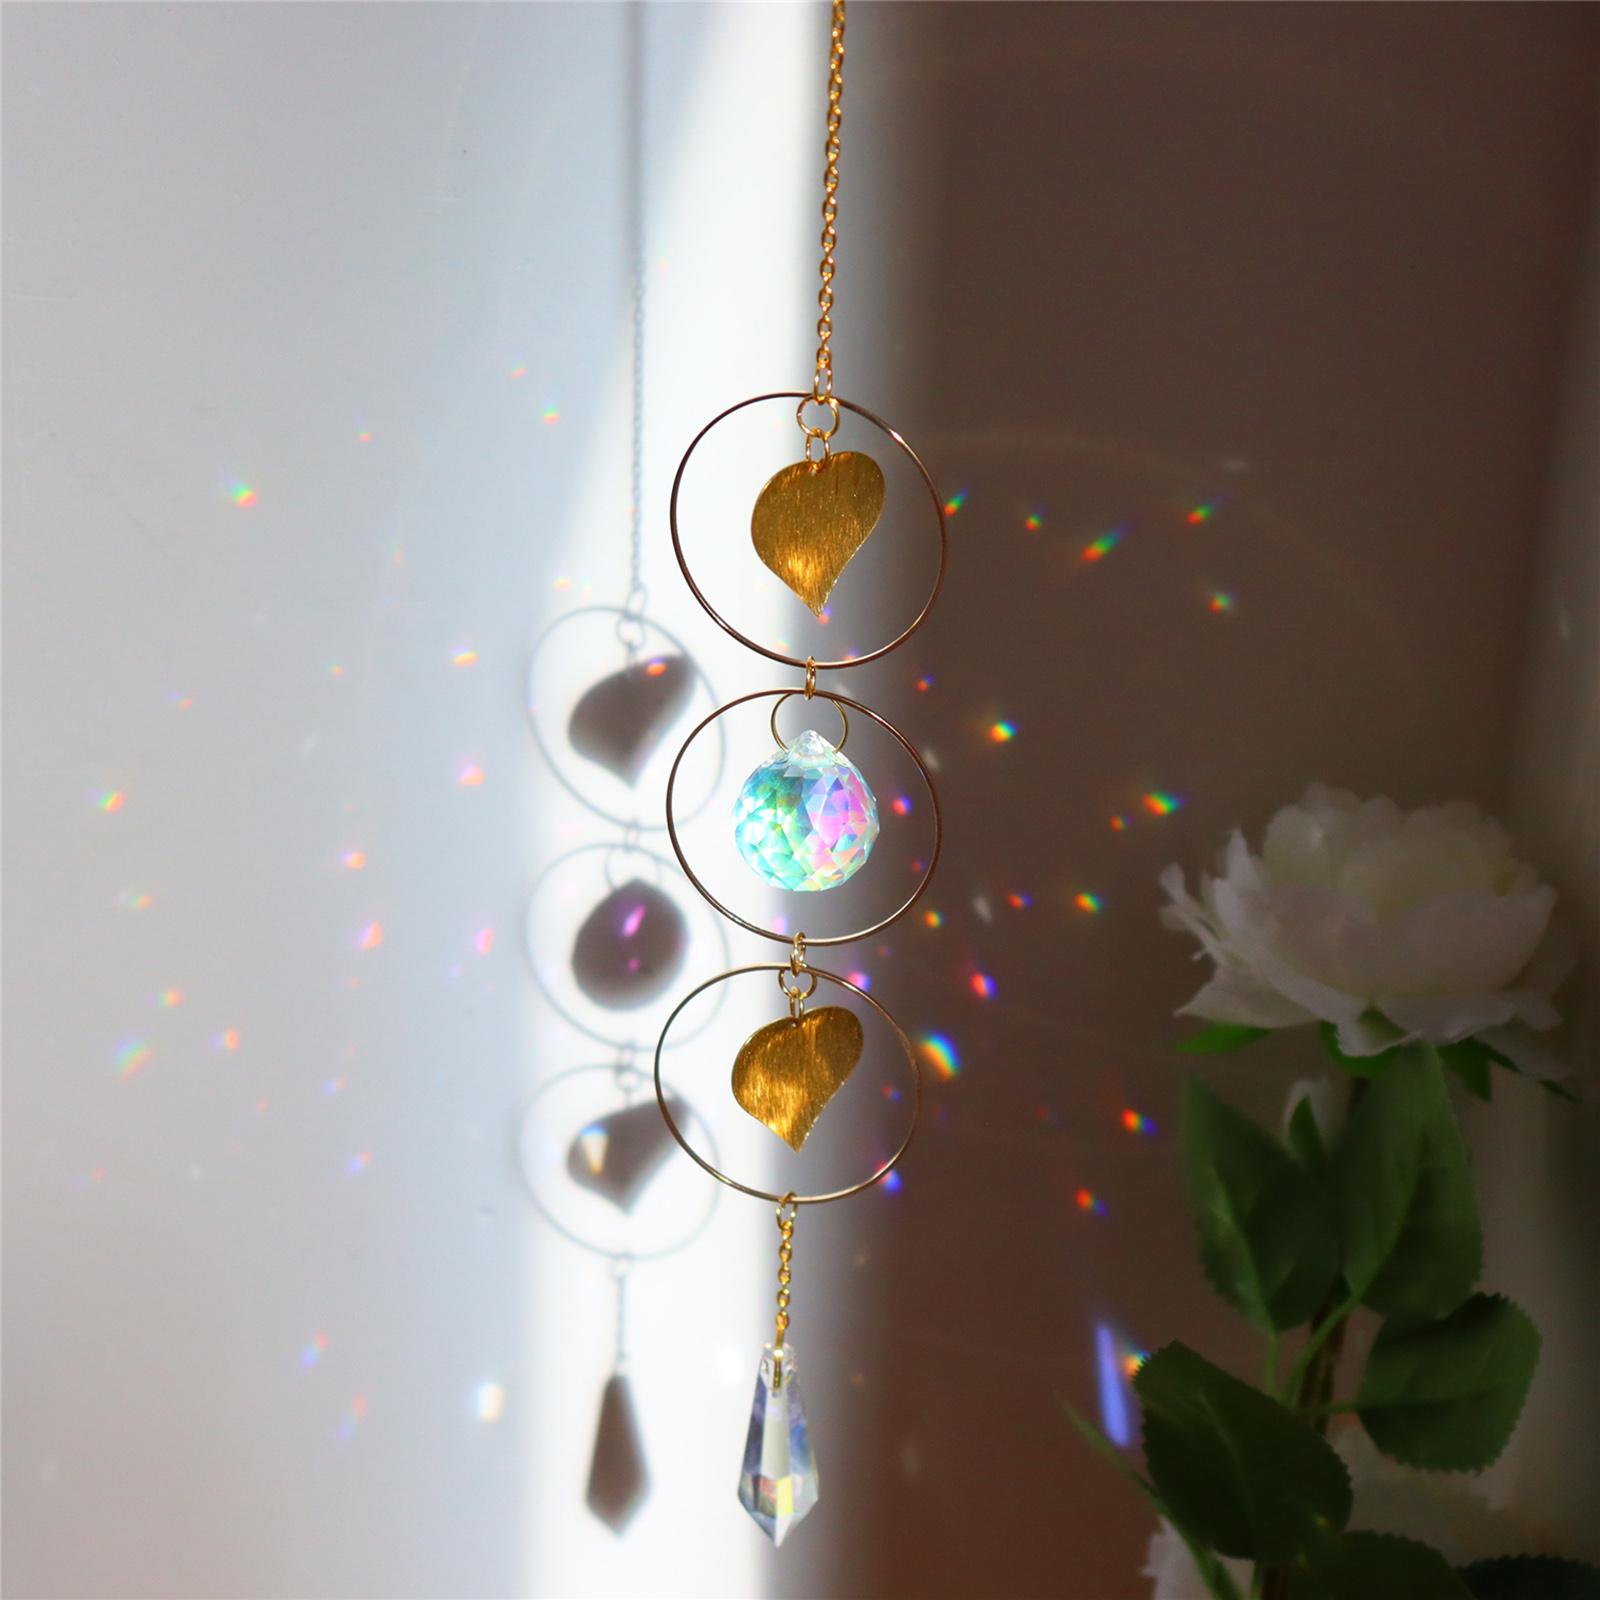 Crystal  Wind Chime Home Hanging Fengshui Outdoor Decor  Style 1